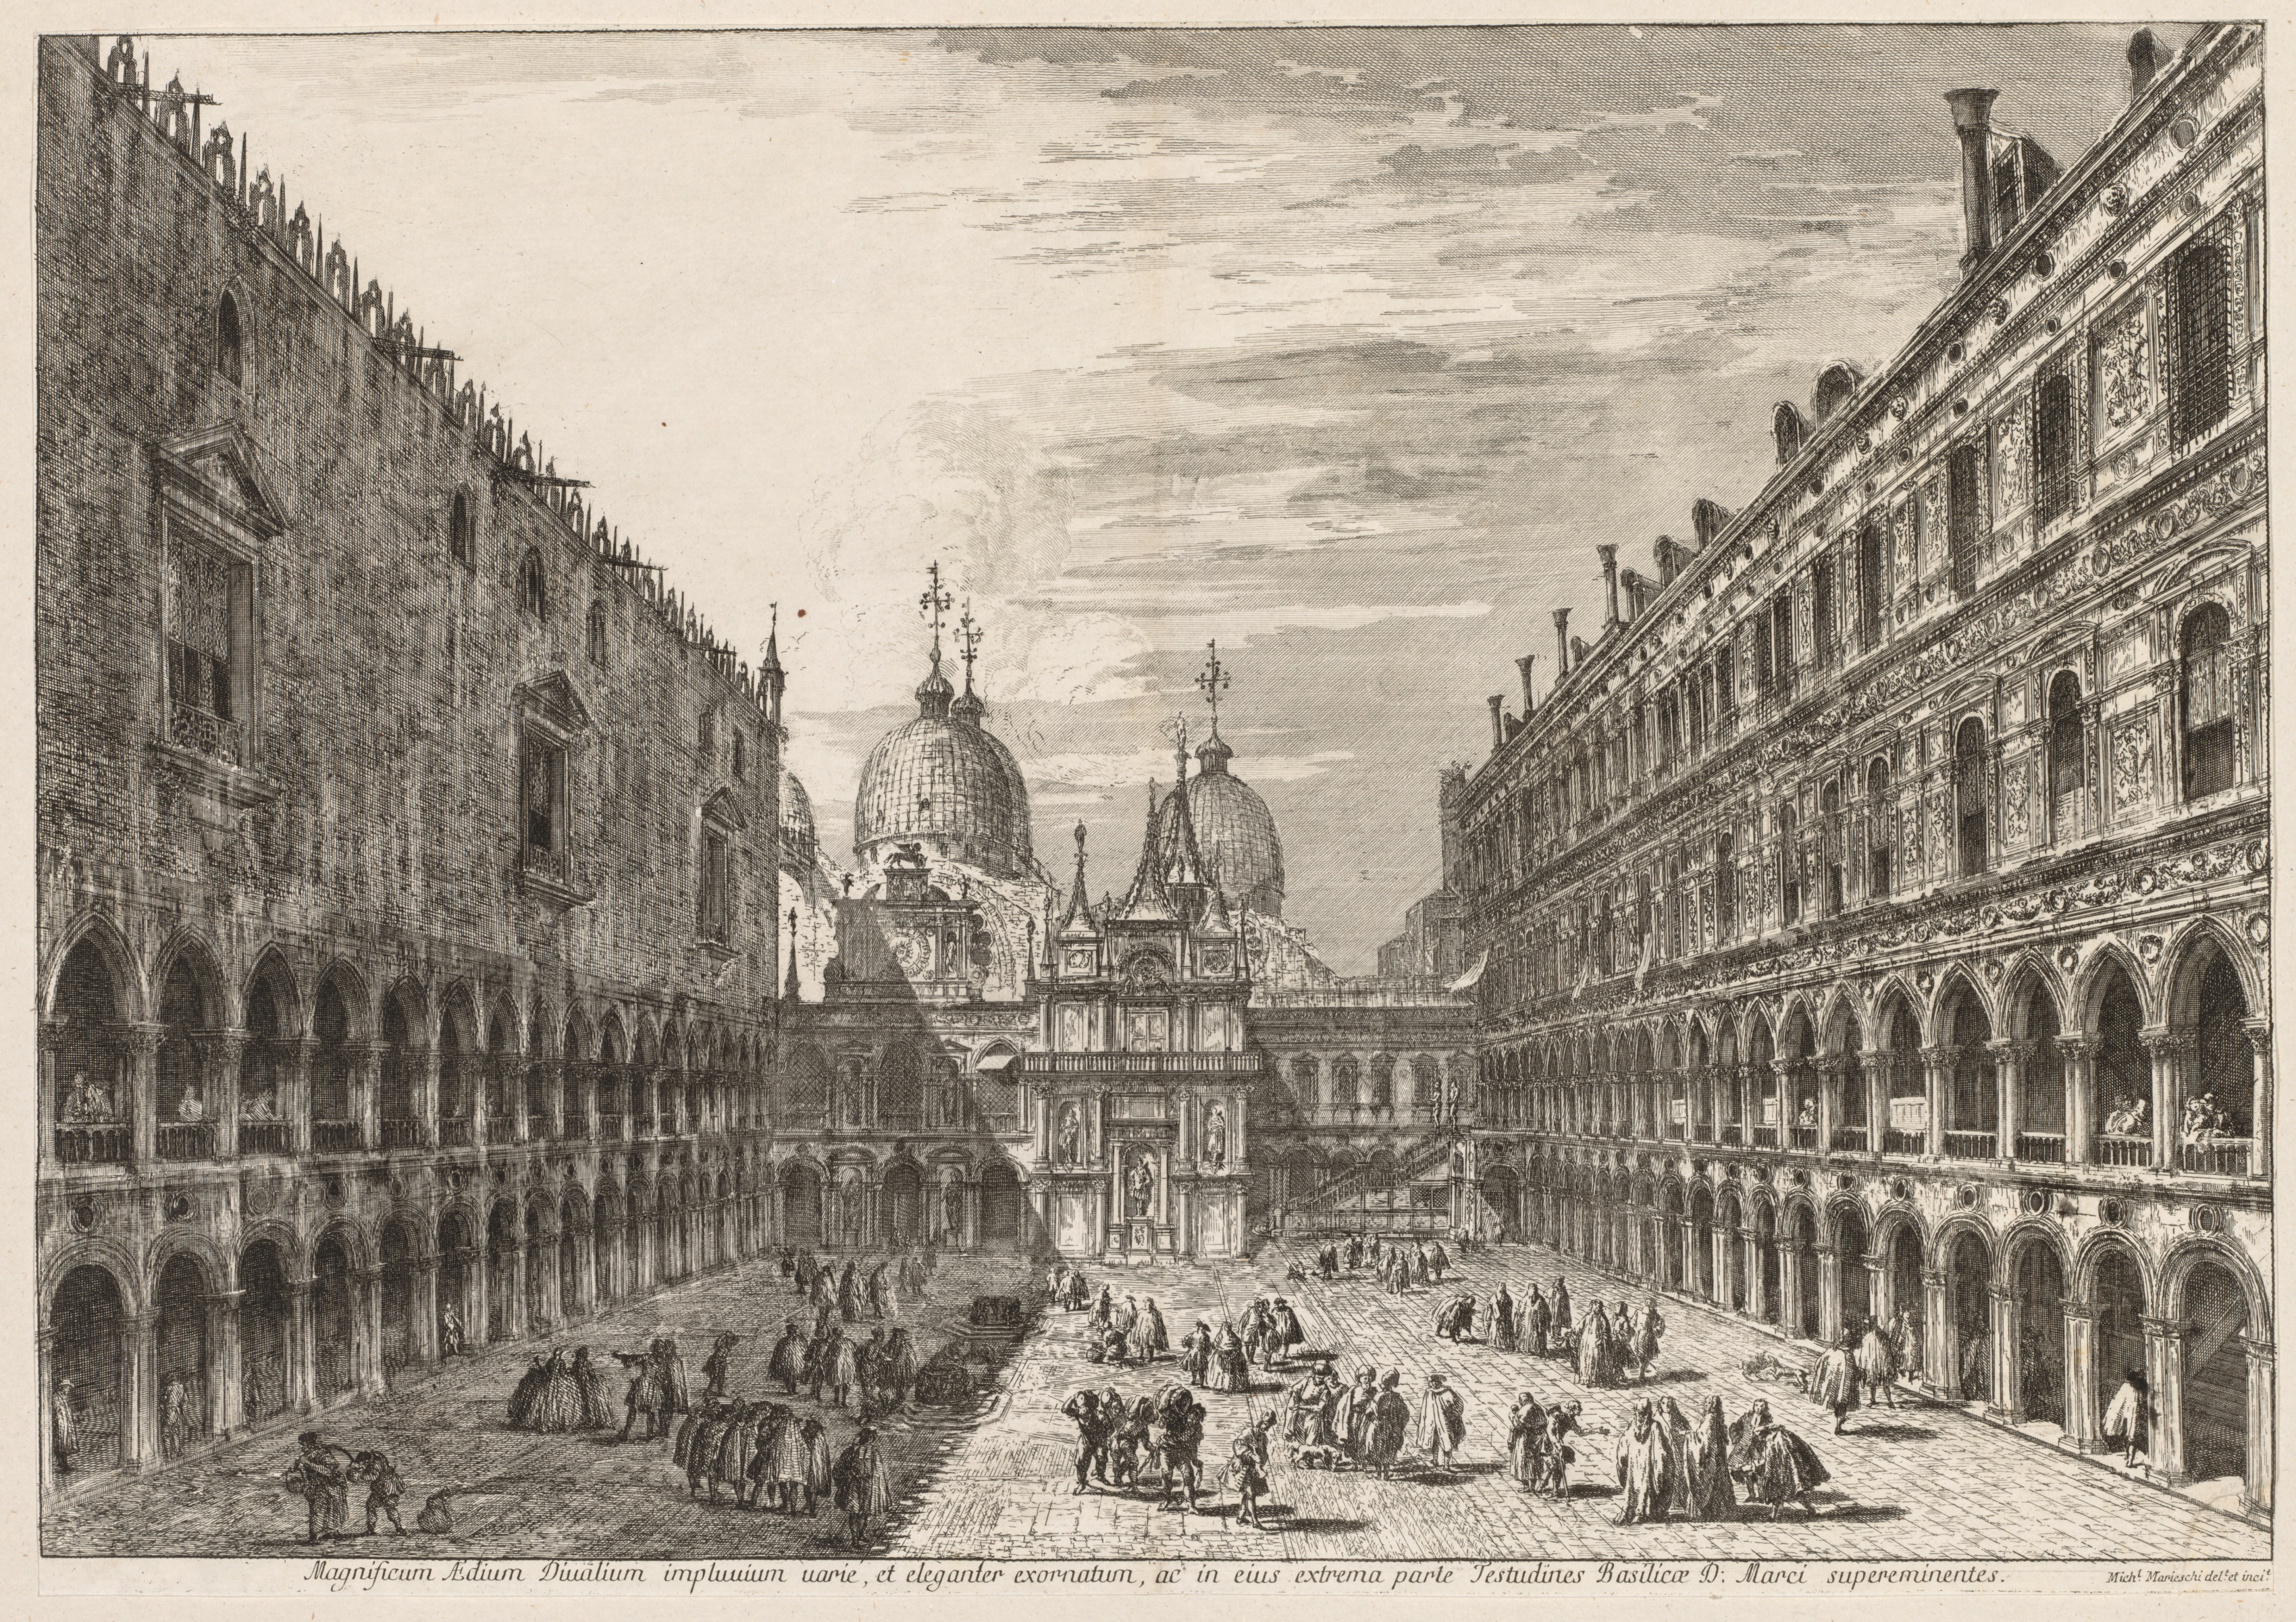 Views of Venice:  The Courtyard of the Ducal Palace